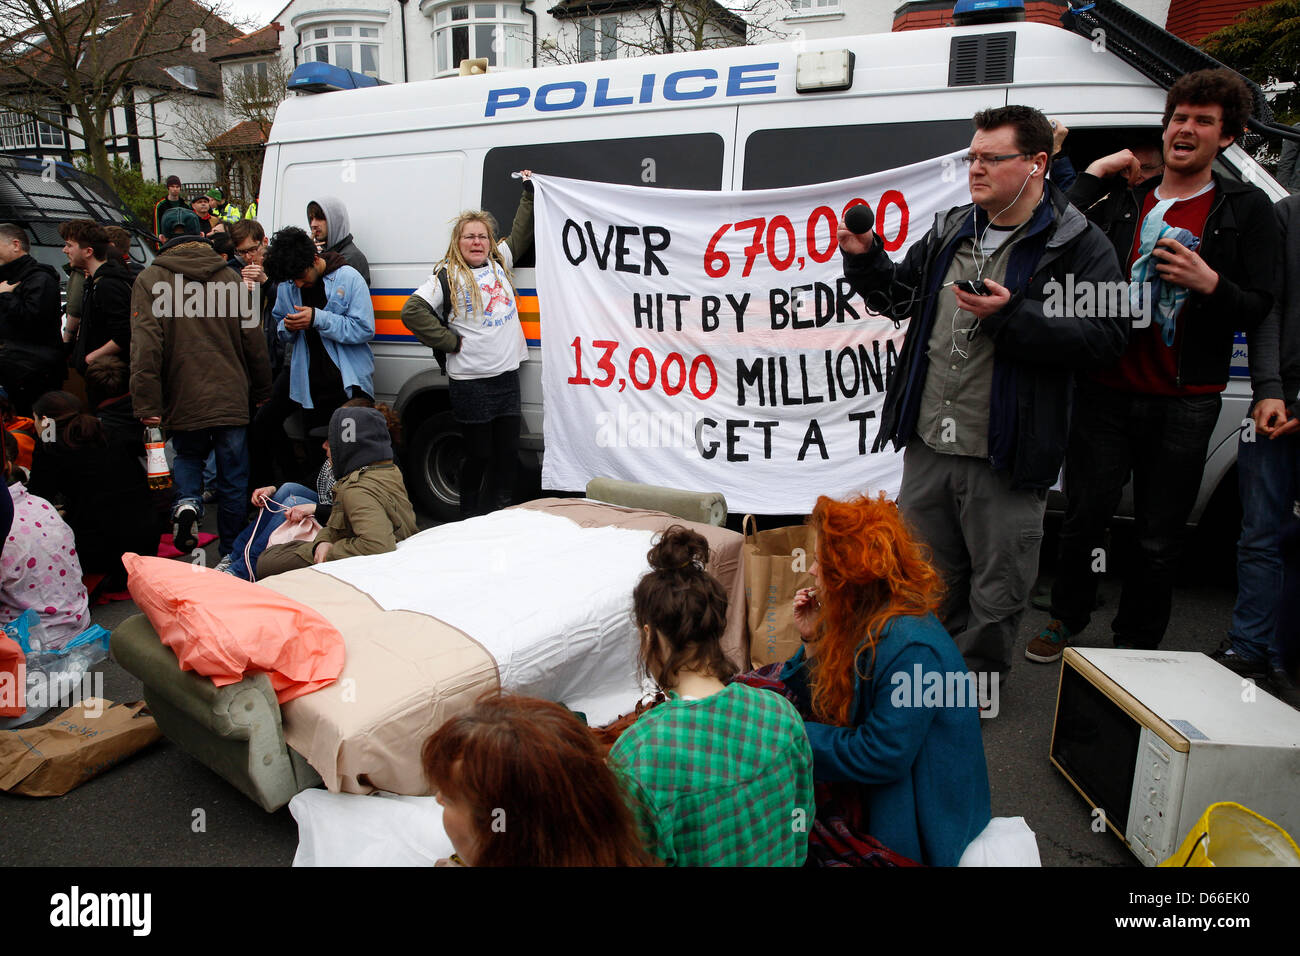 London, UK. 13th April 2013. The 'Who wants to evict a millionaire?' event held by UK Uncut were using civil disobedience in London protesting against a massive wave of cuts that will hit millions of people across the country. Protesters were gathered outside Lord Freud's house with mattresses, blankets and placards. Credit: Lydia Pagoni /Alamy Live News Stock Photo